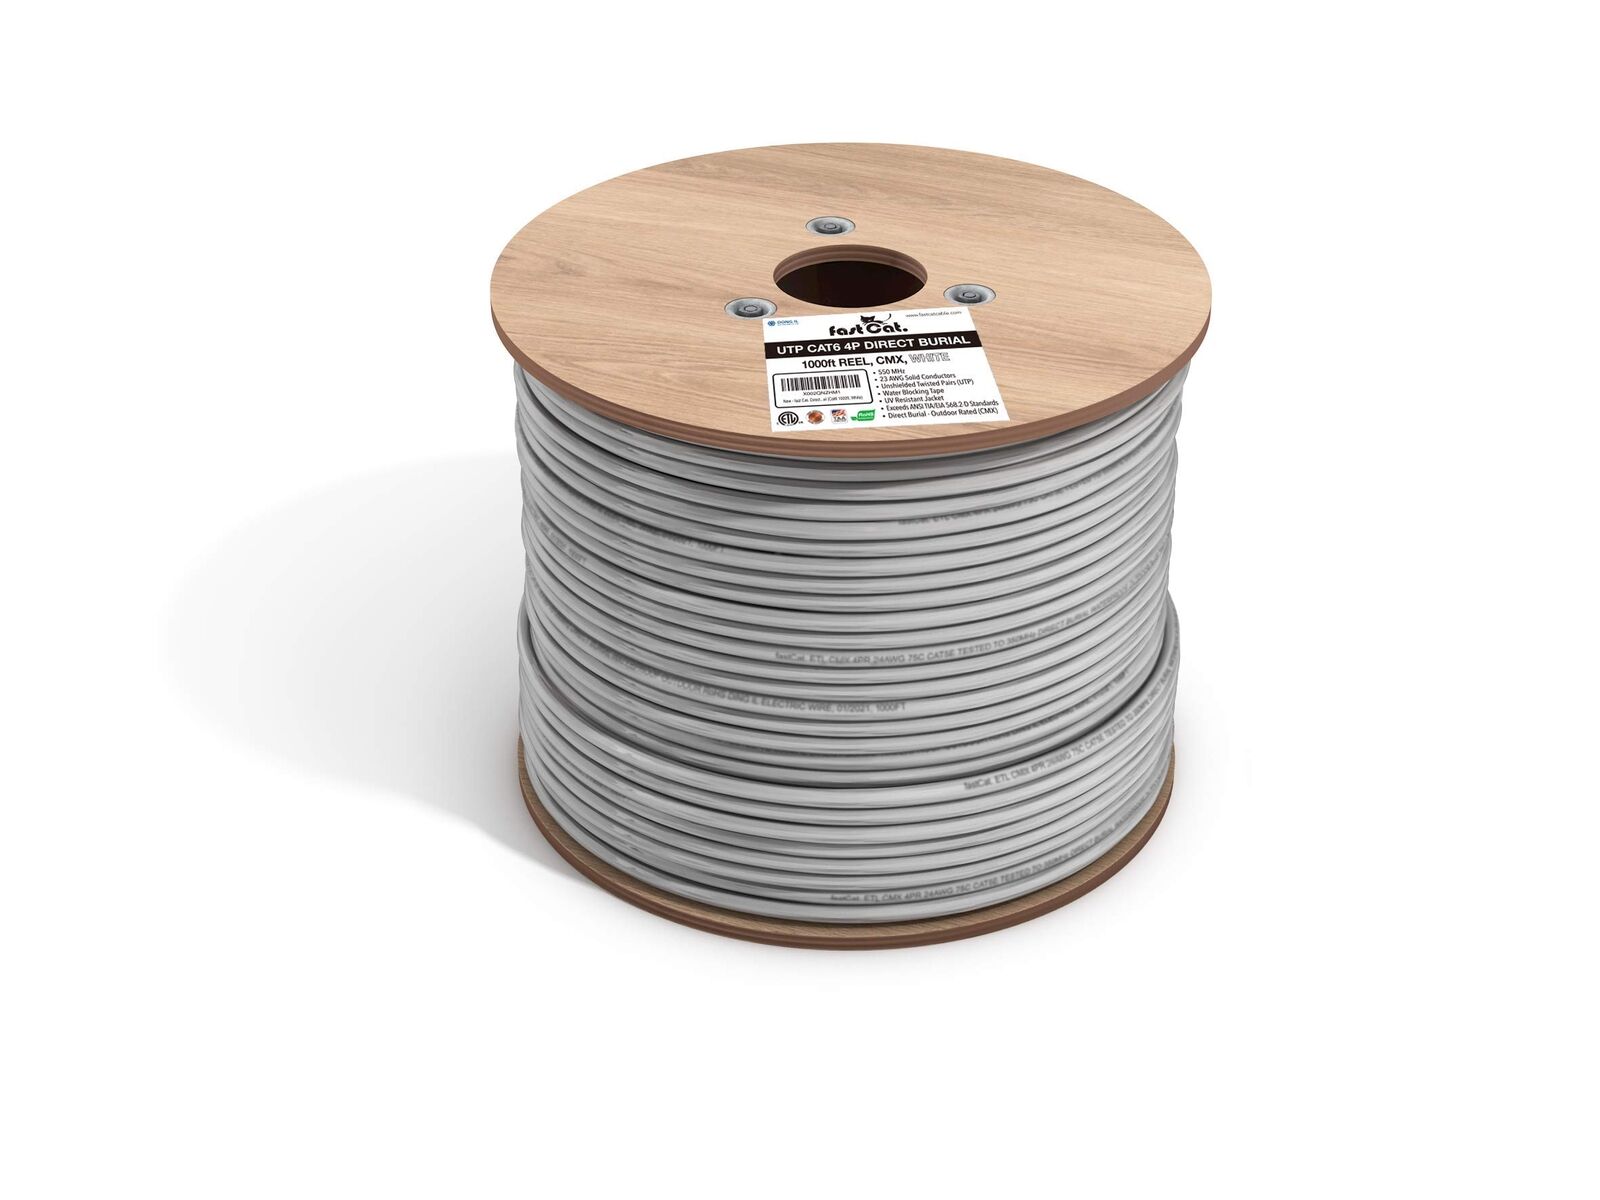 fast Cat. Cat6 Direct Burial Outdoor Ethernet Cable - 1000Ft Waterproof Cat6 ...